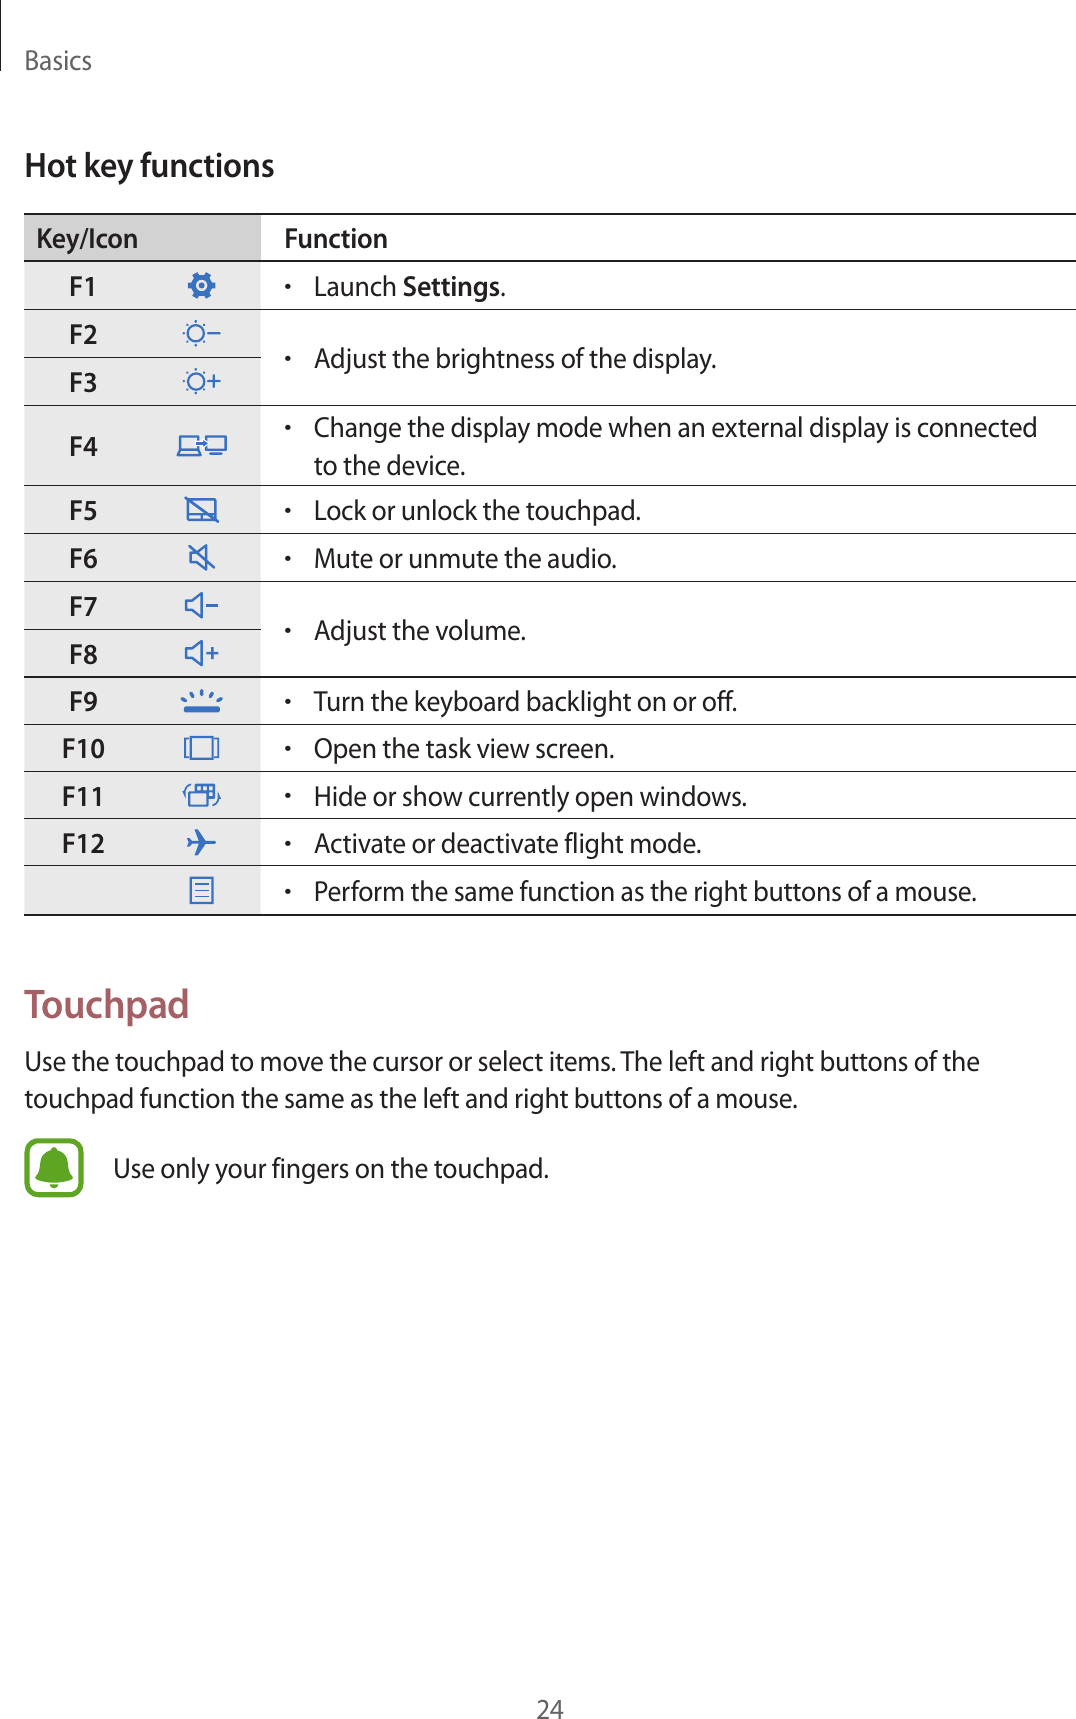 Basics24Hot key functionsKey/Icon FunctionF1•Launch Settings.F2•Adjust the brightness of the display.F3F4•Change the display mode when an external display is connected to the device.F5•Lock or unlock the touchpad.F6•Mute or unmute the audio.F7•Adjust the volume.F8F9•Turn the keyboard backlight on or off.F10•Open the task view screen.F11•Hide or show currently open windows.F12•Activate or deactivate flight mode.•Perform the same function as the right buttons of a mouse.TouchpadUse the touchpad to move the cursor or select items. The left and right buttons of the touchpad function the same as the left and right buttons of a mouse.Use only your fingers on the touchpad.